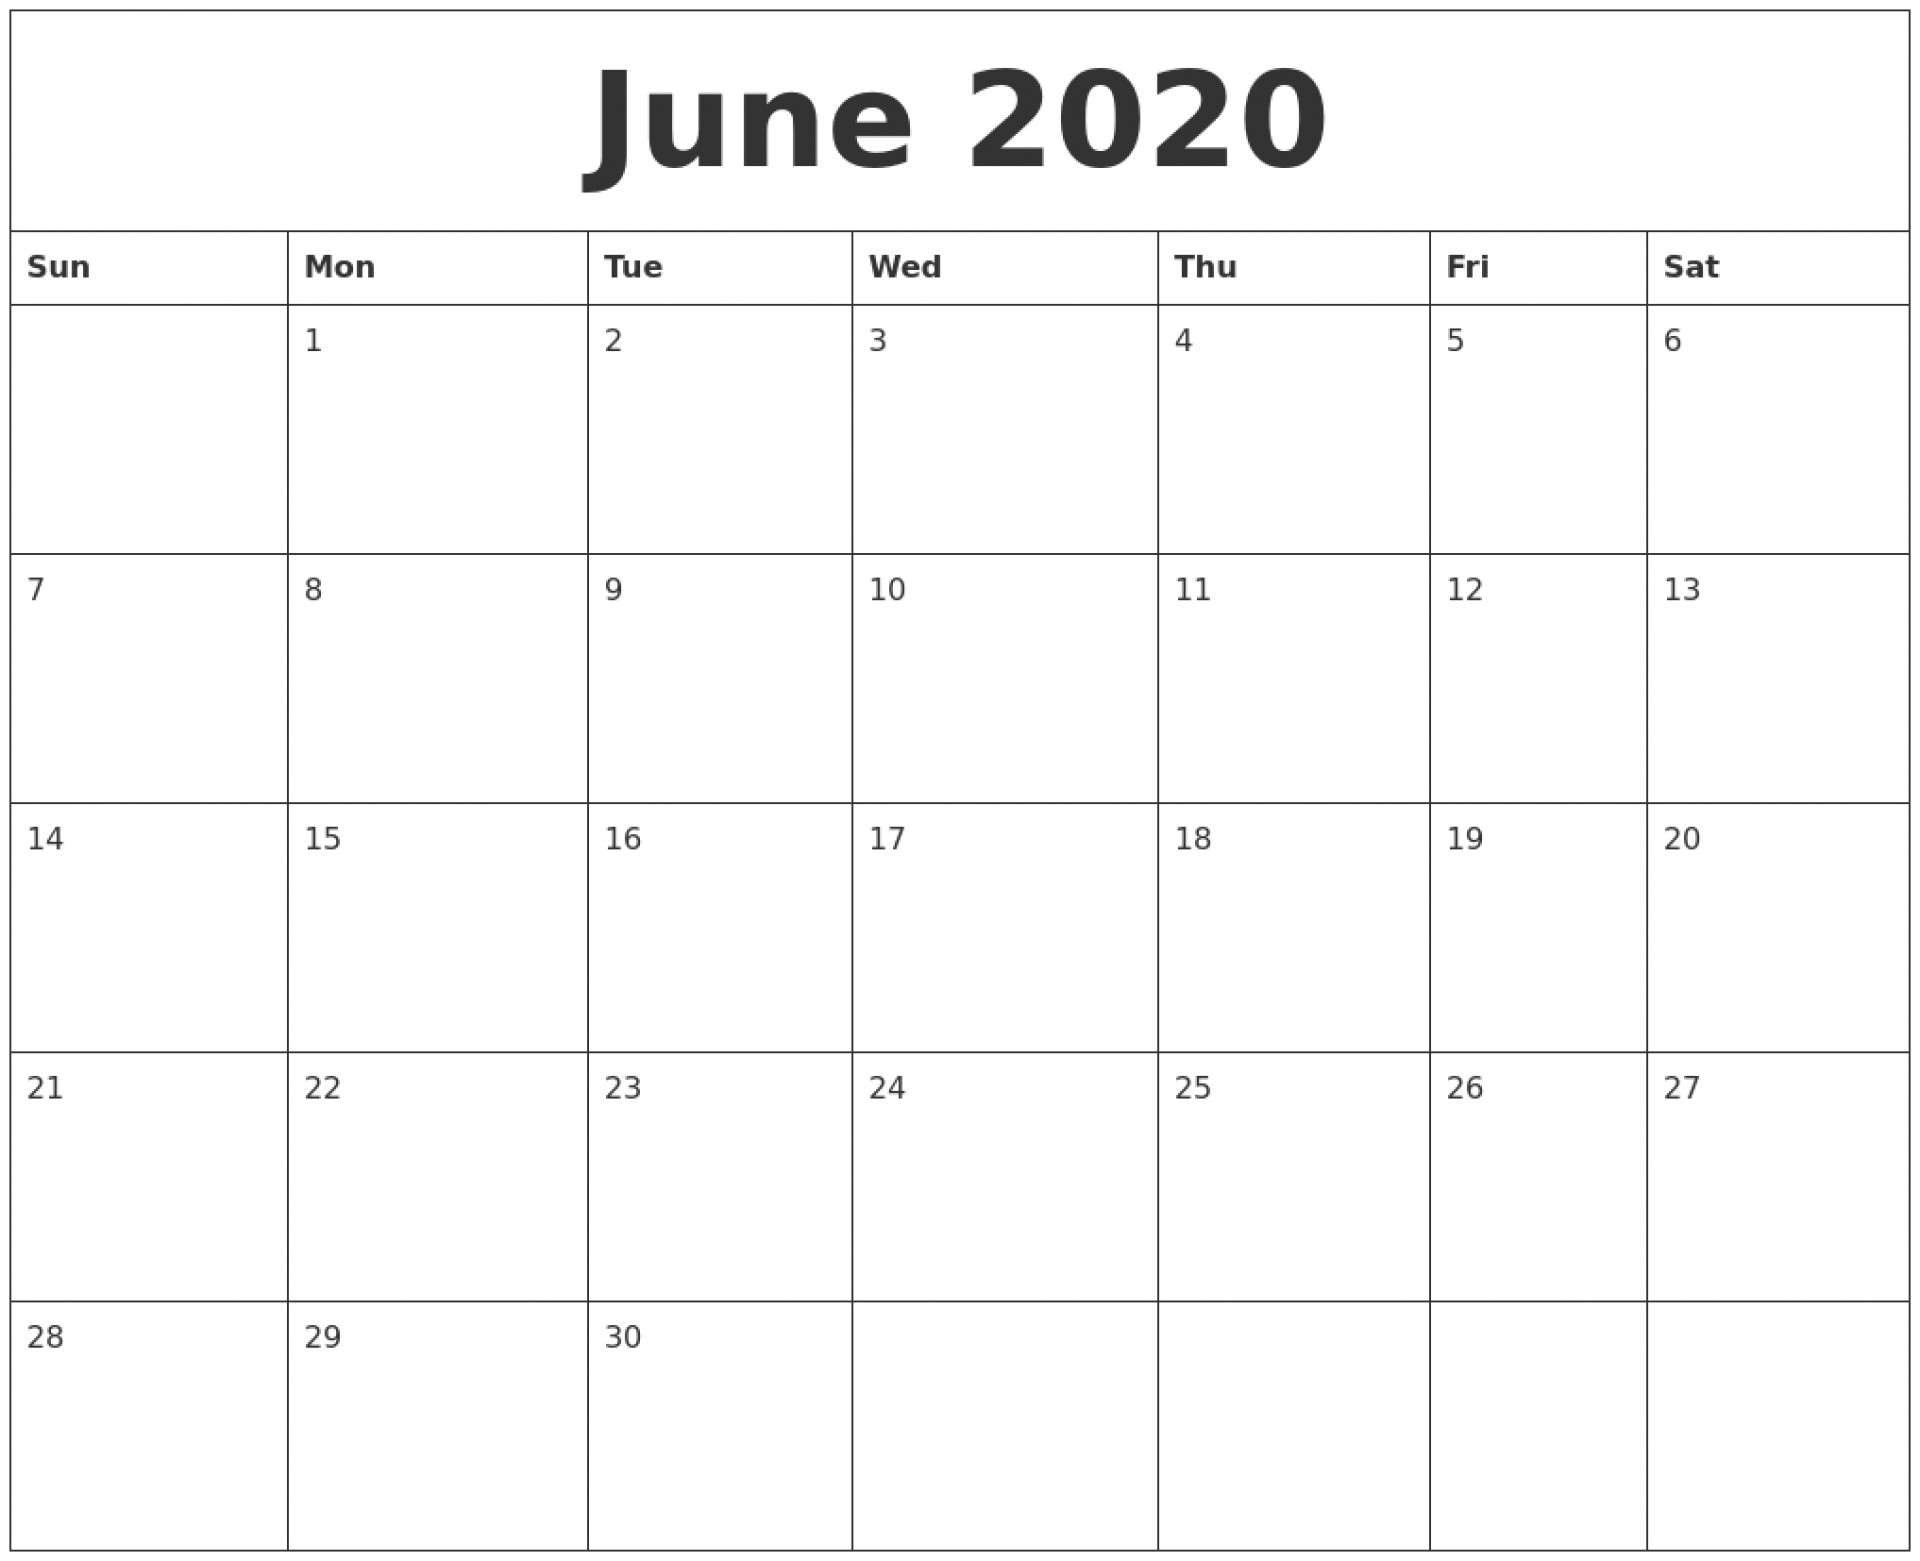 020 Free Blank Calendar Template Ideas 20Blank Weekly-Free Printable Monthly Calendar 2020 With Time Slots